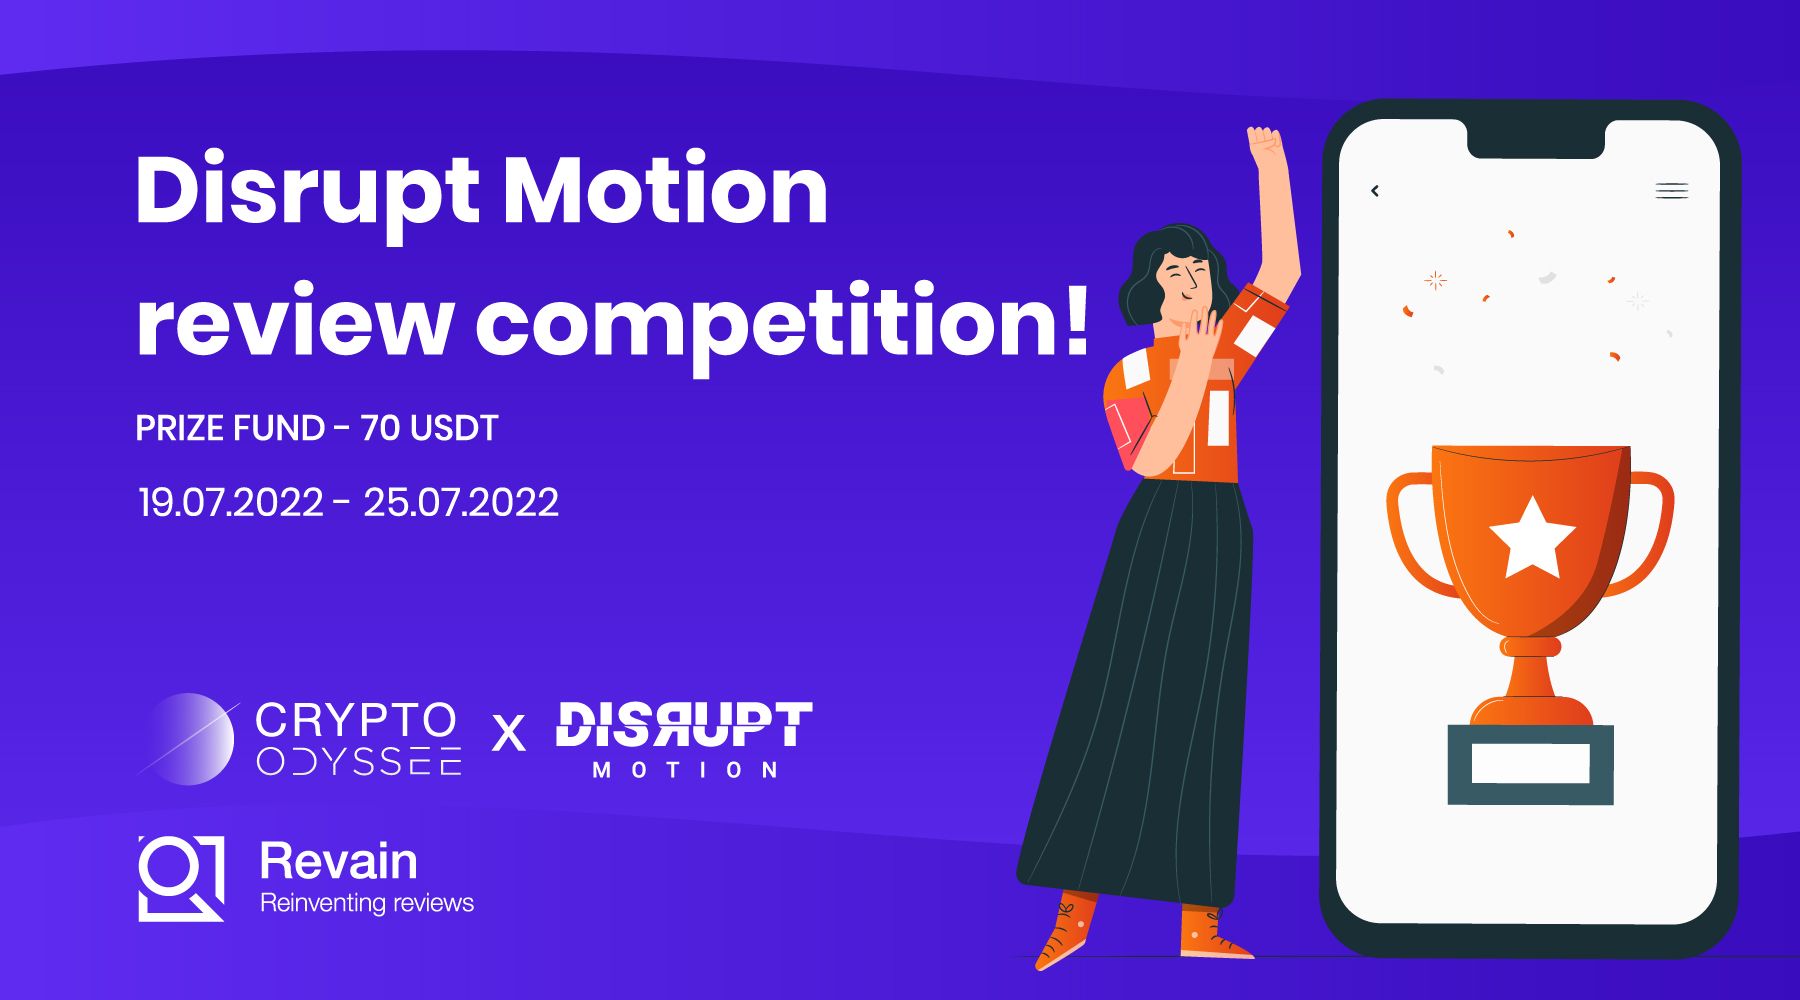 Article Disrupt Motion & Revain start a new competition!